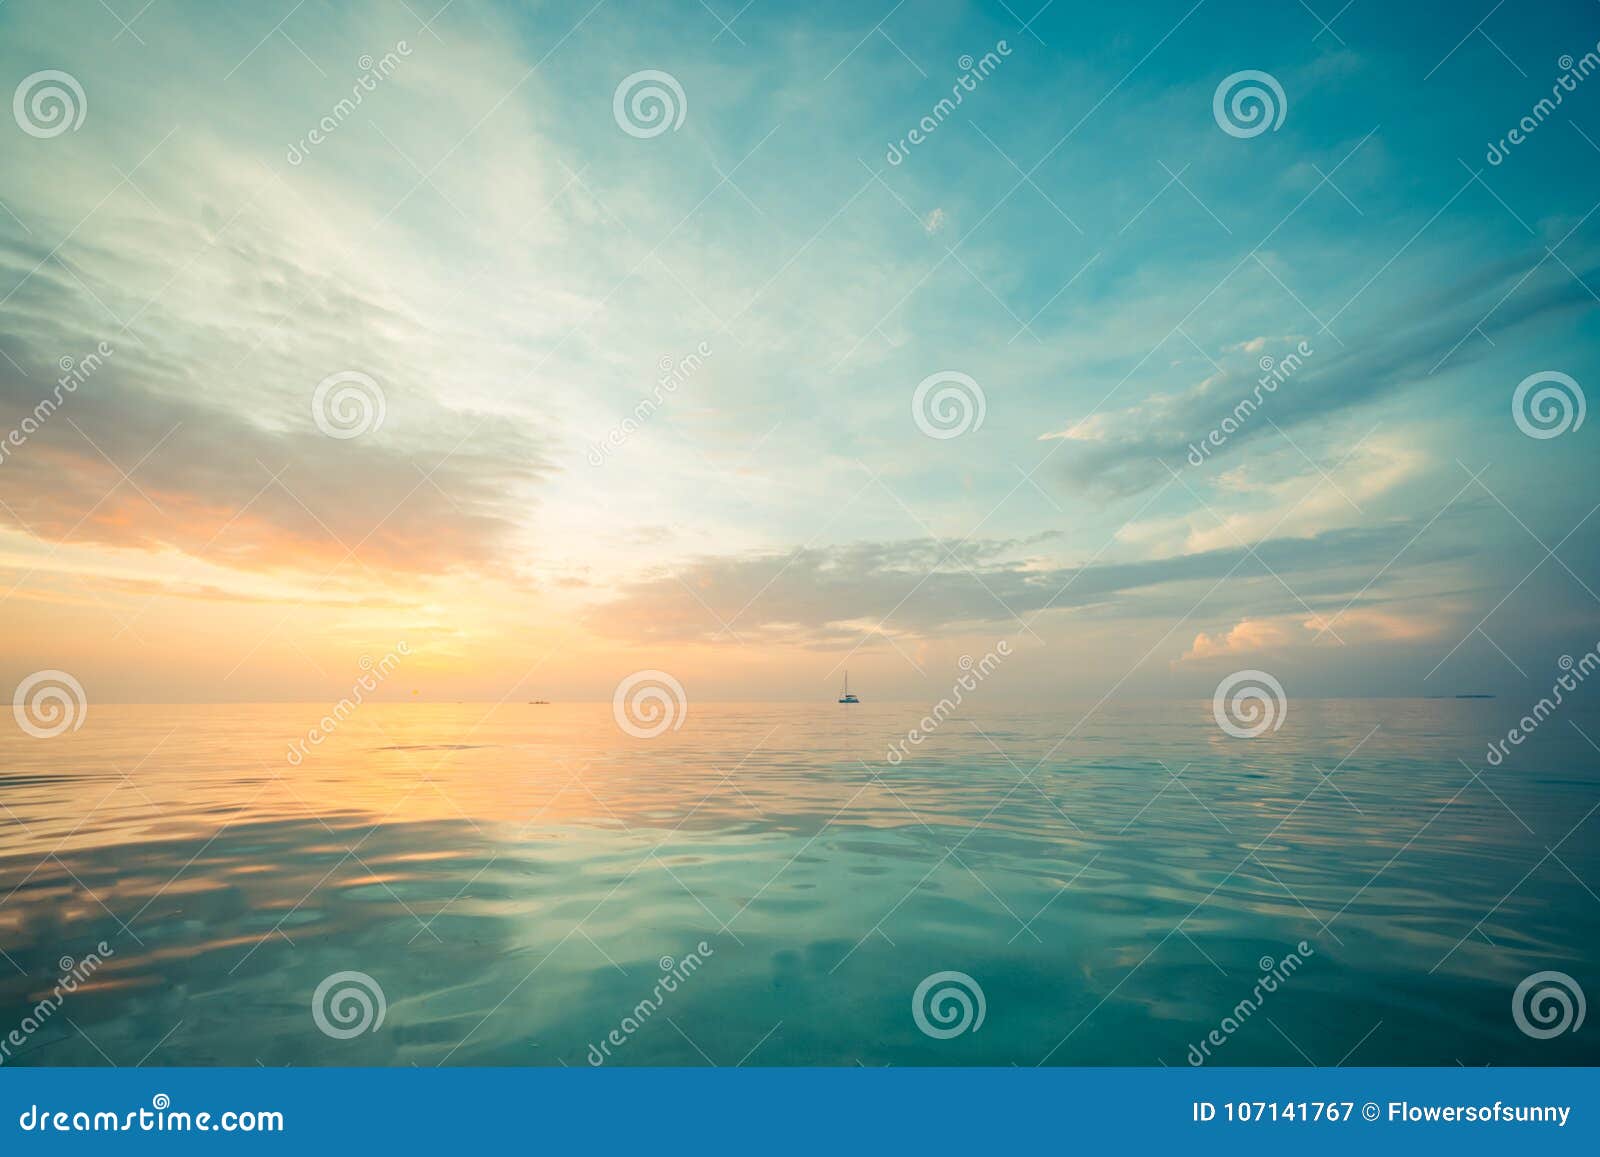 relaxing and calm sea view. open ocean water and sunset sky. tranquil nature background. infinity sea horizon